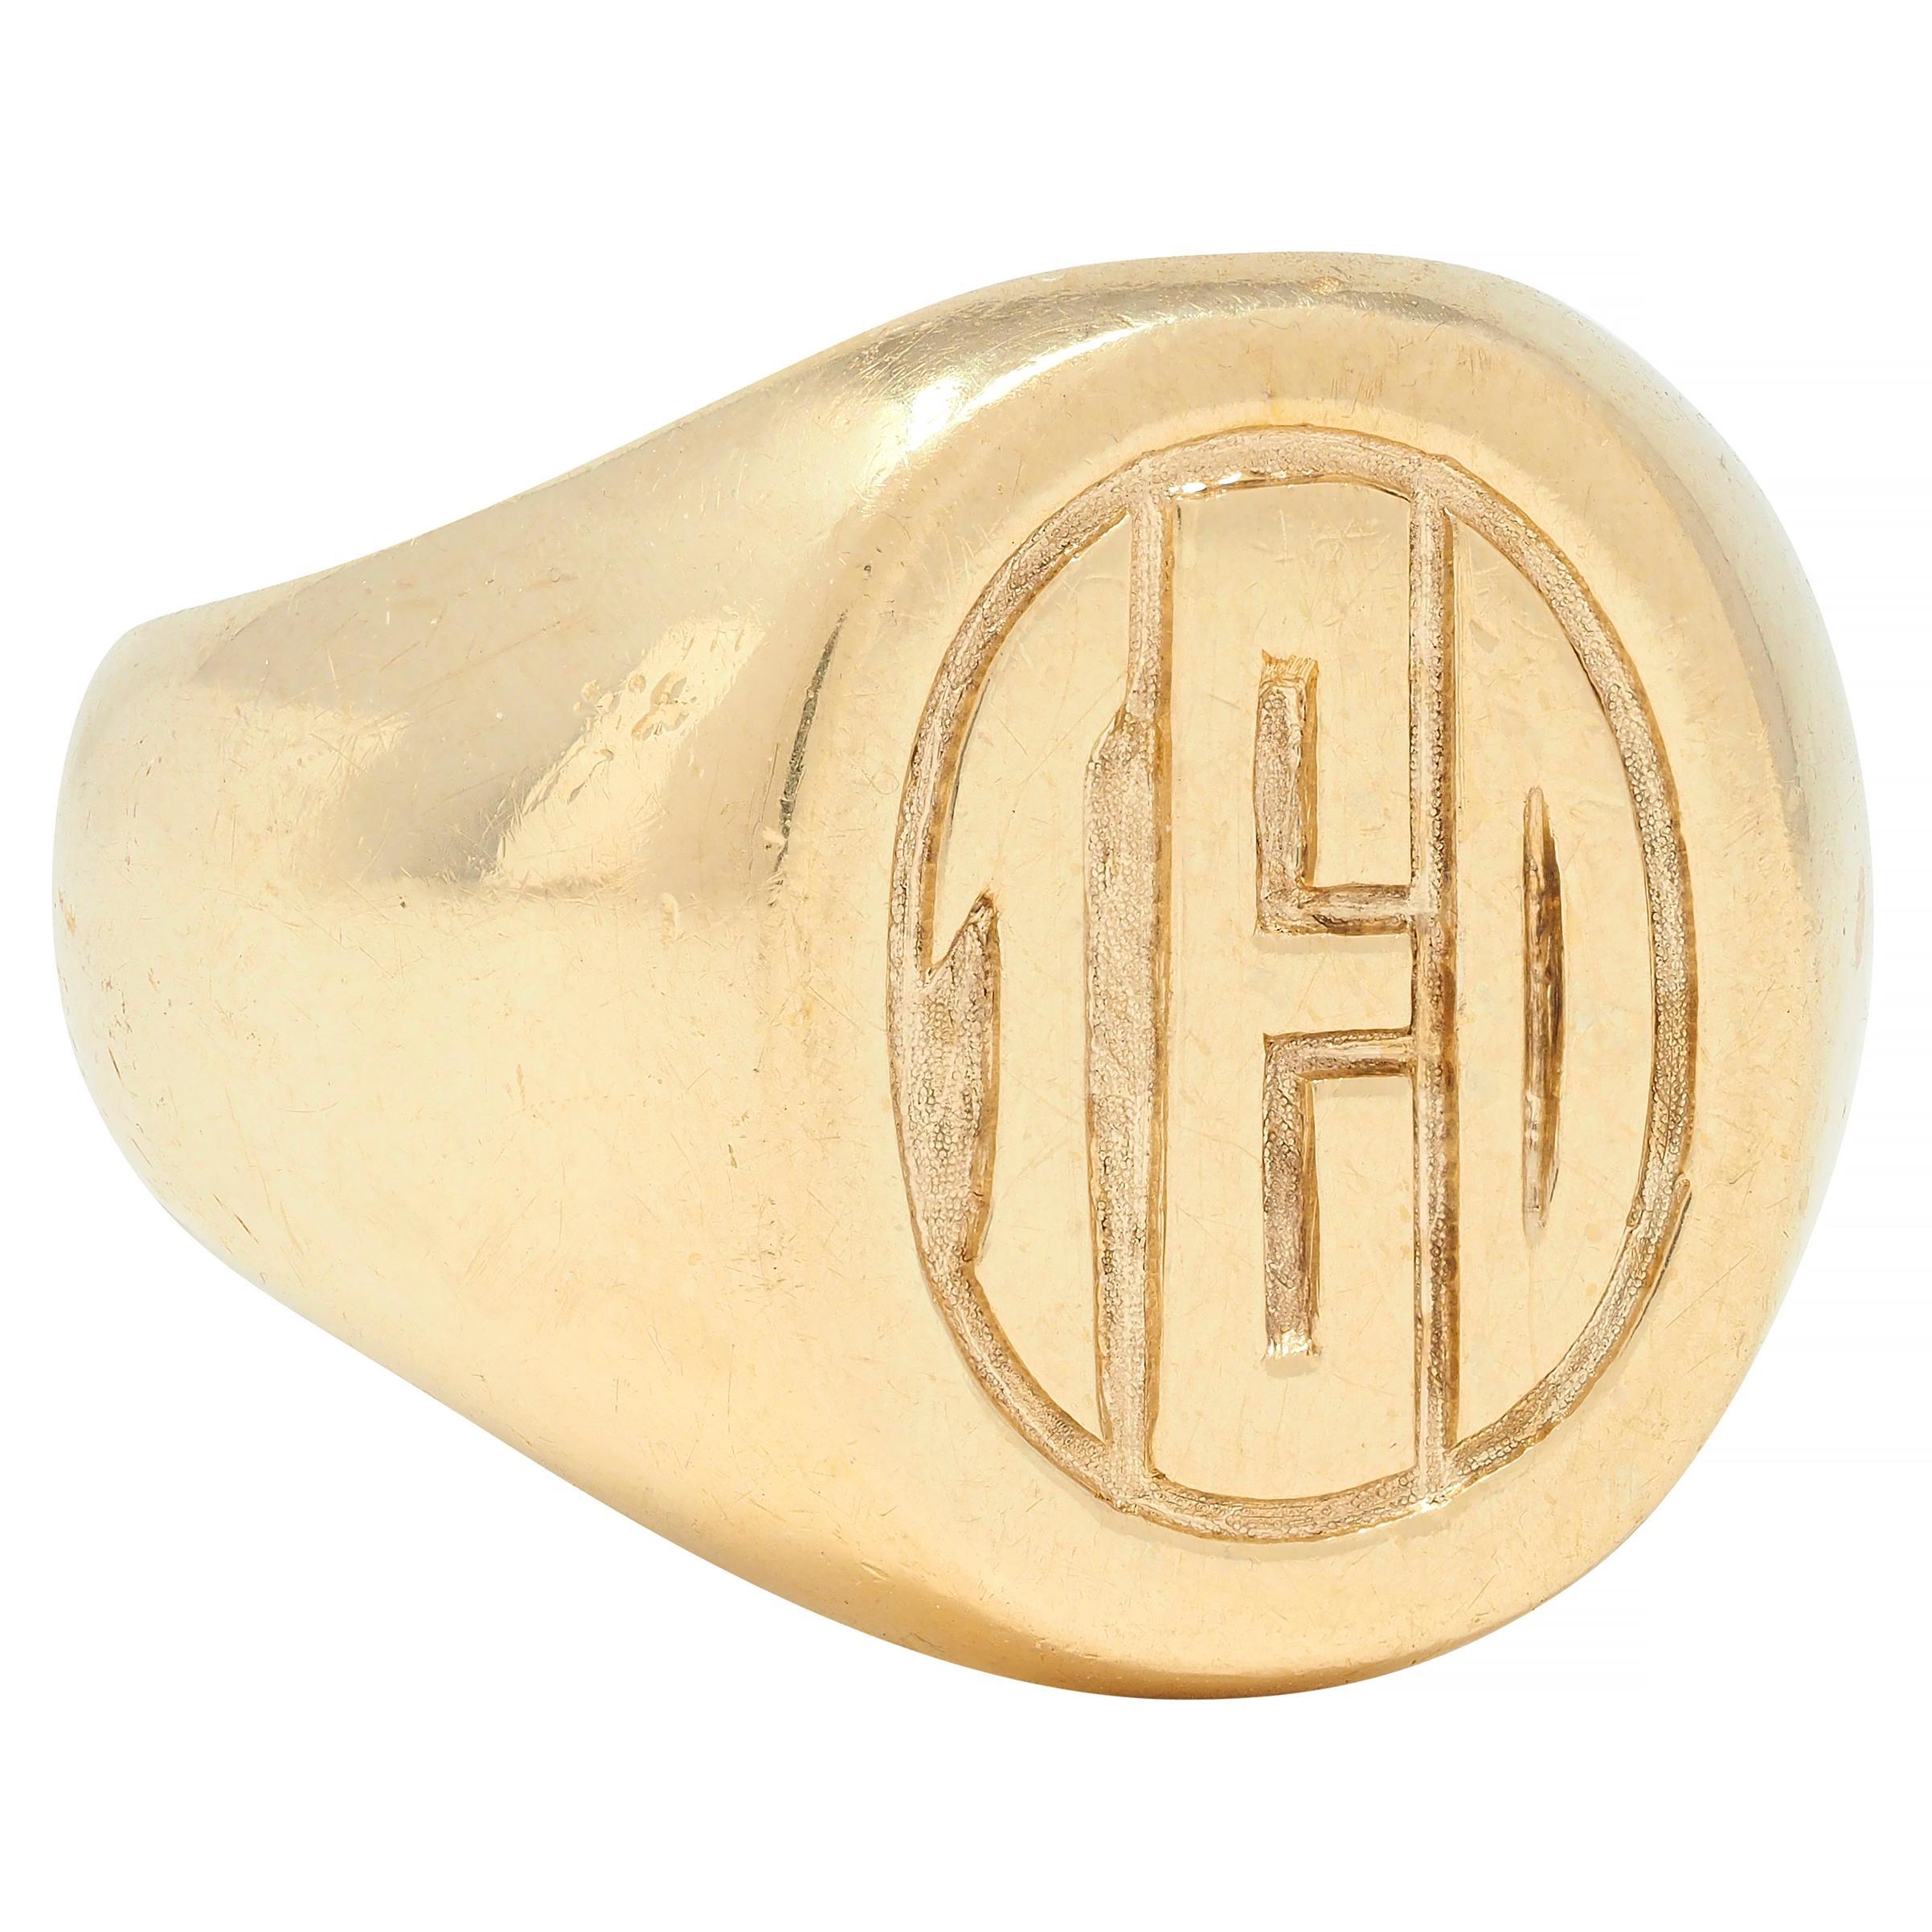 Centering an oval-shaped face engraved with stylized text
Depicting the name 'TED' with grooved surround 
With rounded shoulders and high polish finish
Tested as 14 karat gold
Fully signed for Tiffany & Co. 
Circa: 1970s
Ring size: 9 1/4 and sizable